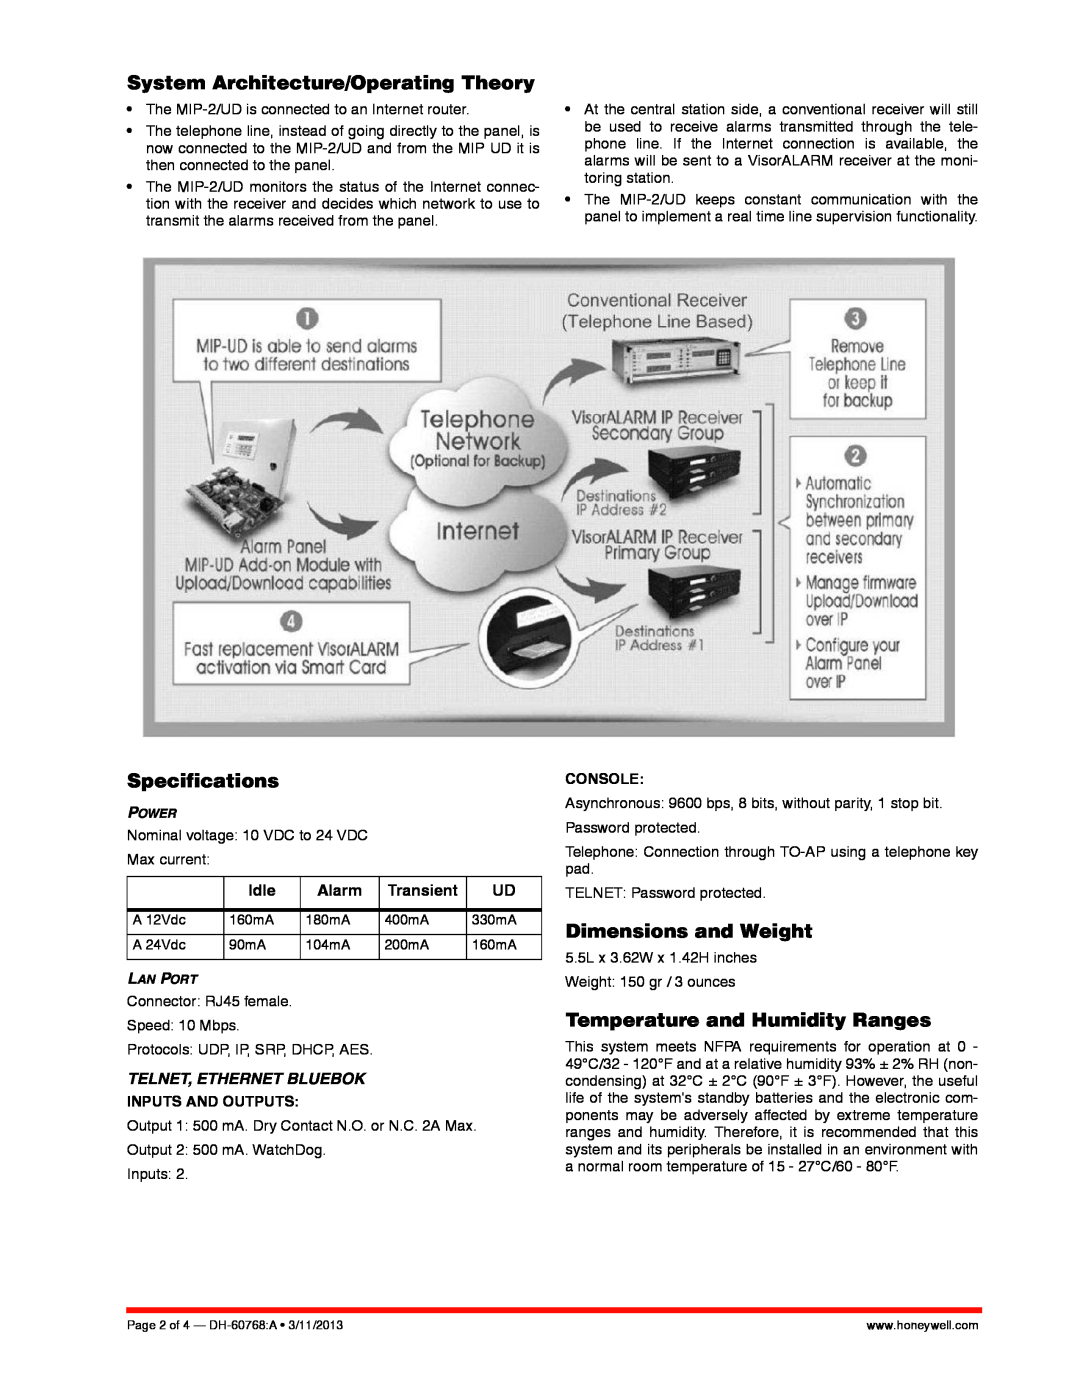 Honeywell MIP-2, UD System Architecture/Operating Theory, Specifications, Dimensions and Weight, Idle, Alarm, Transient 